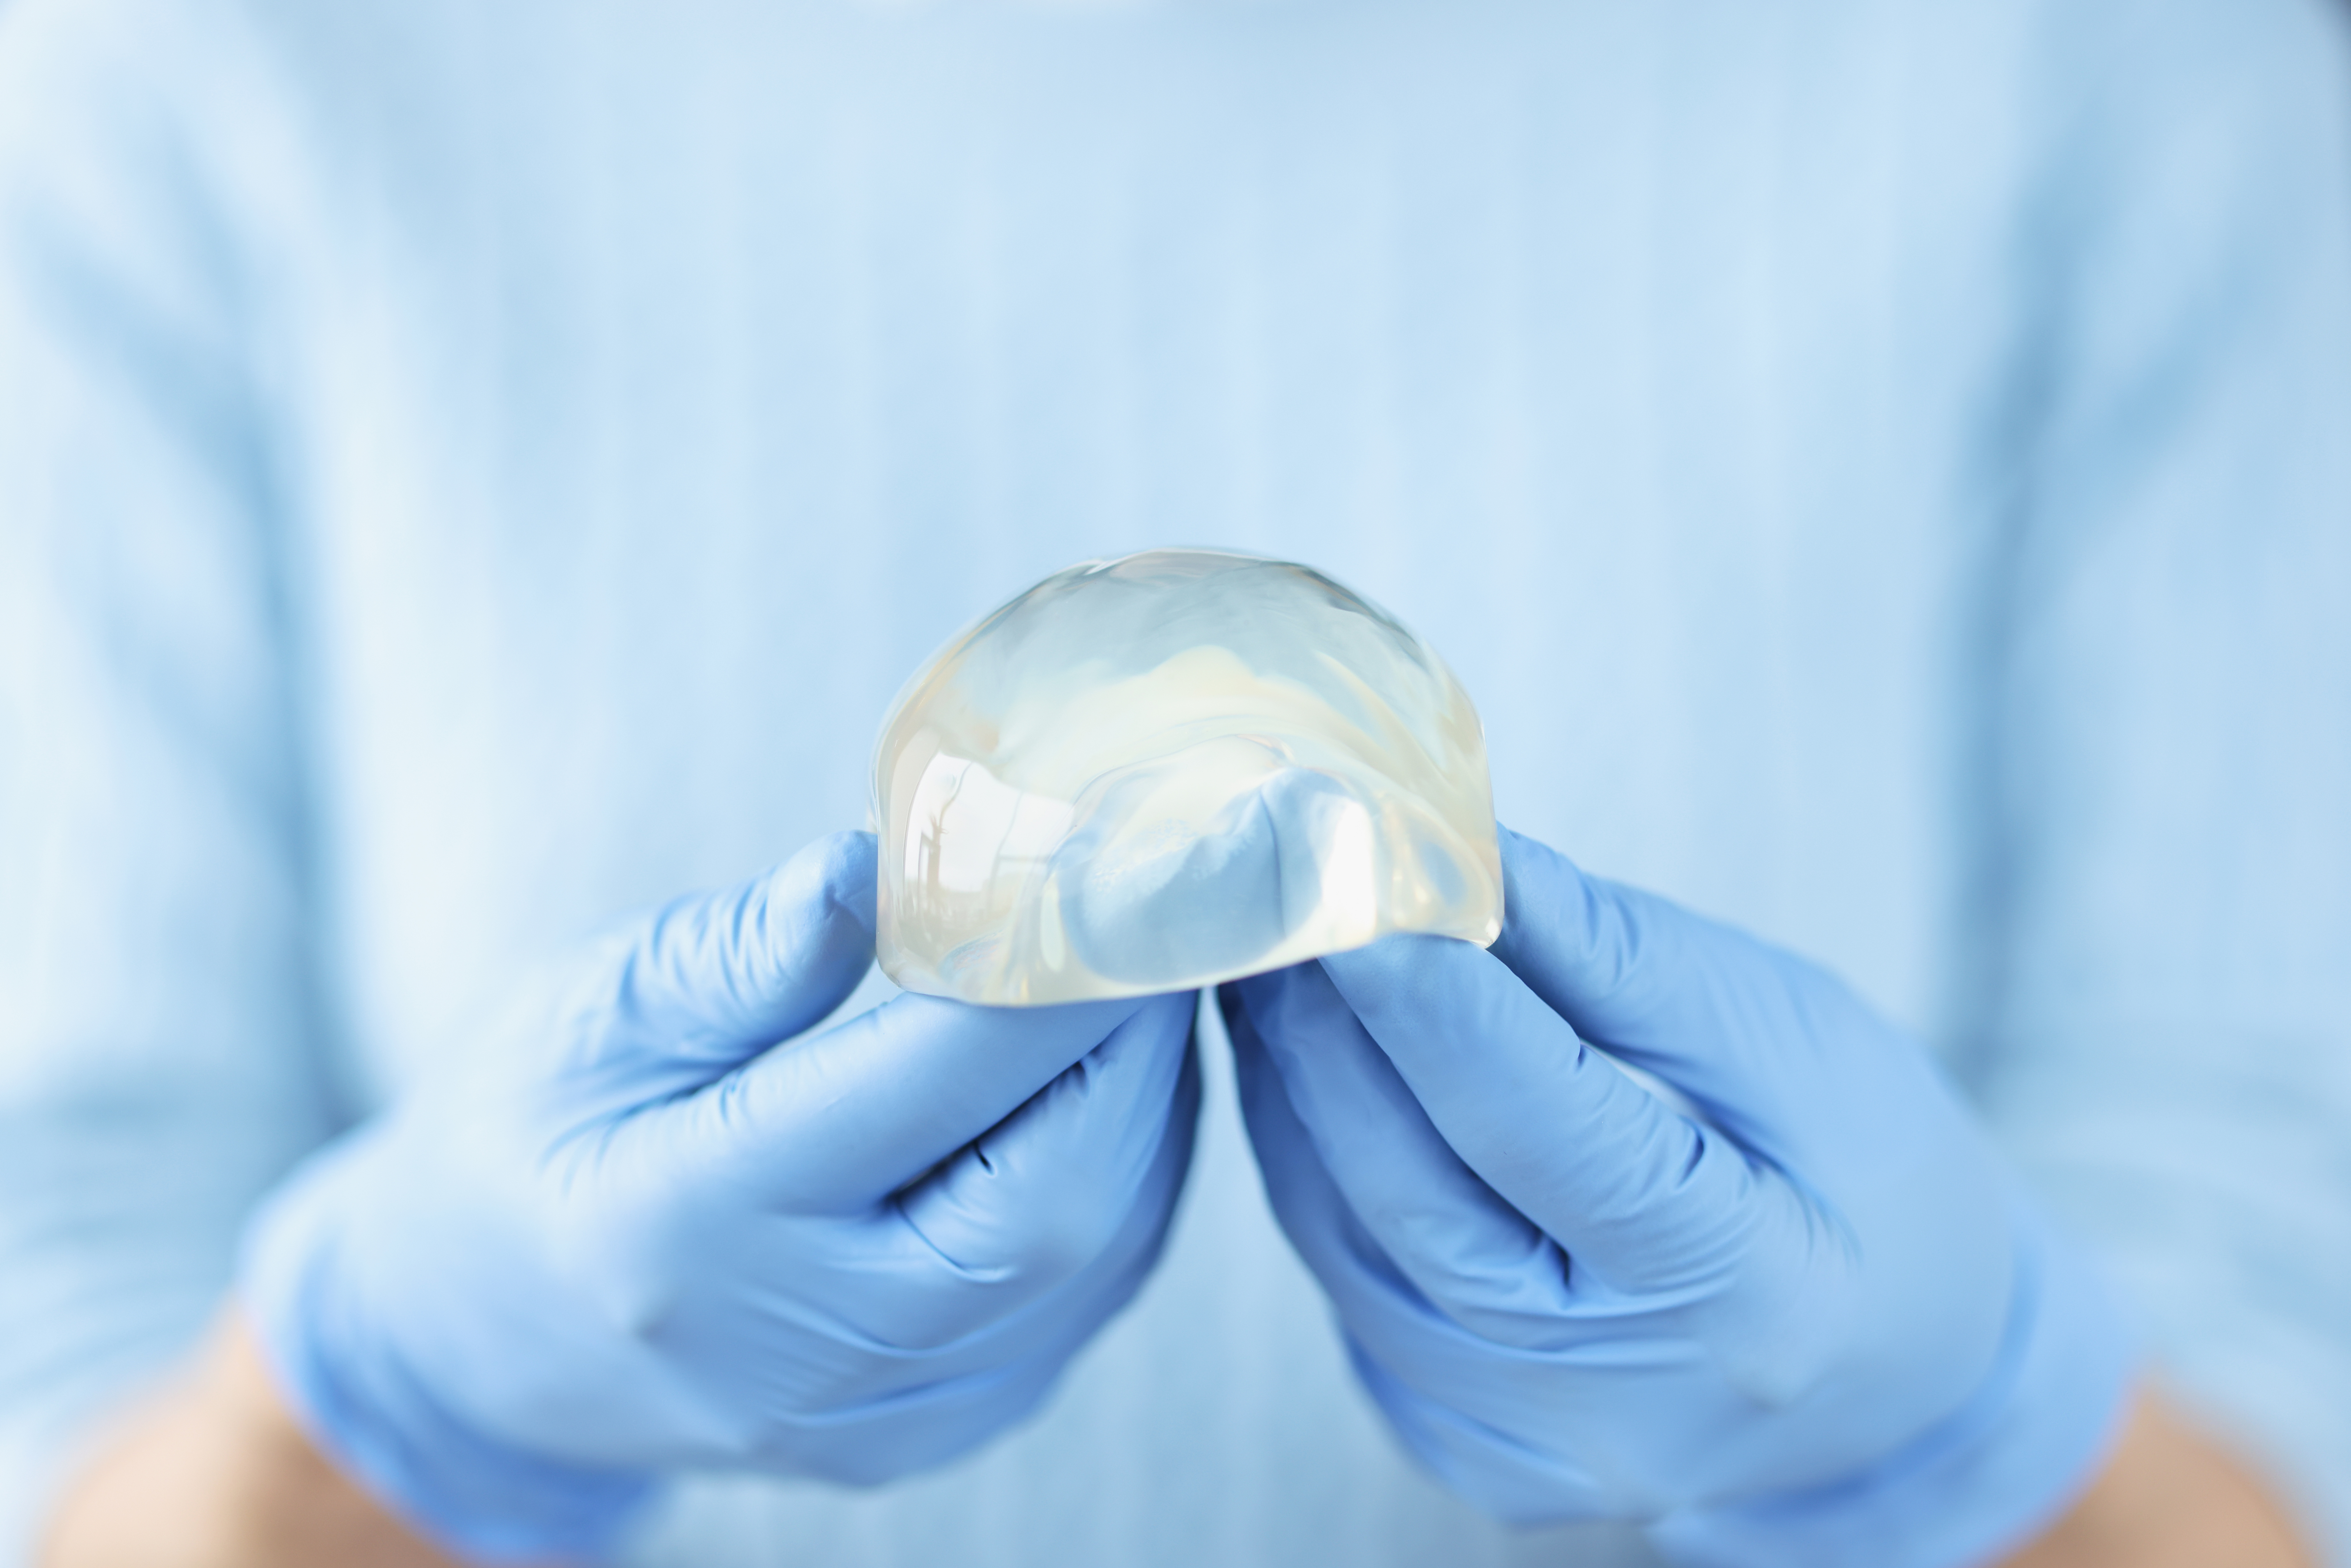 silicone-breast-implant-hands-doctor-breast-augmentation-plastic-surgery-concept